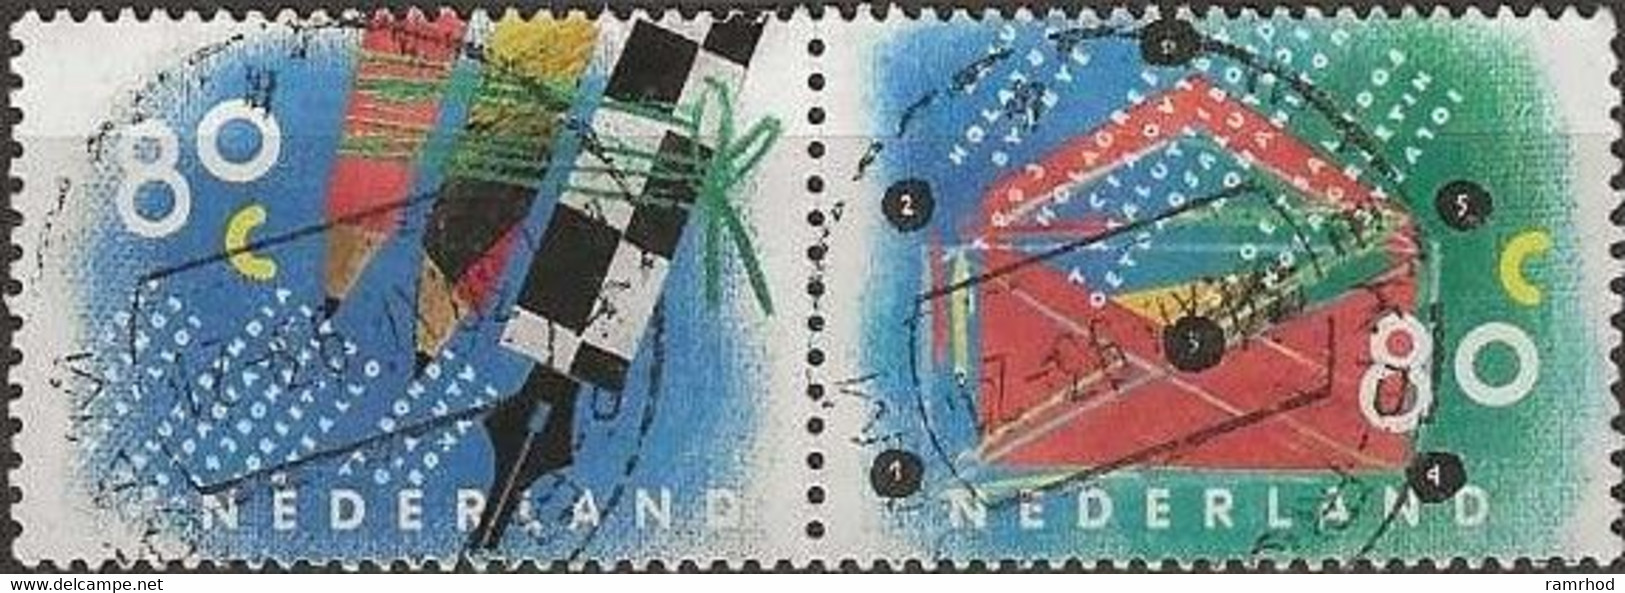 NETHERLANDS 1993 Letter Writing Campaign - 80c X 2 Envelope & Pen & Pencils FU PAIR - Used Stamps